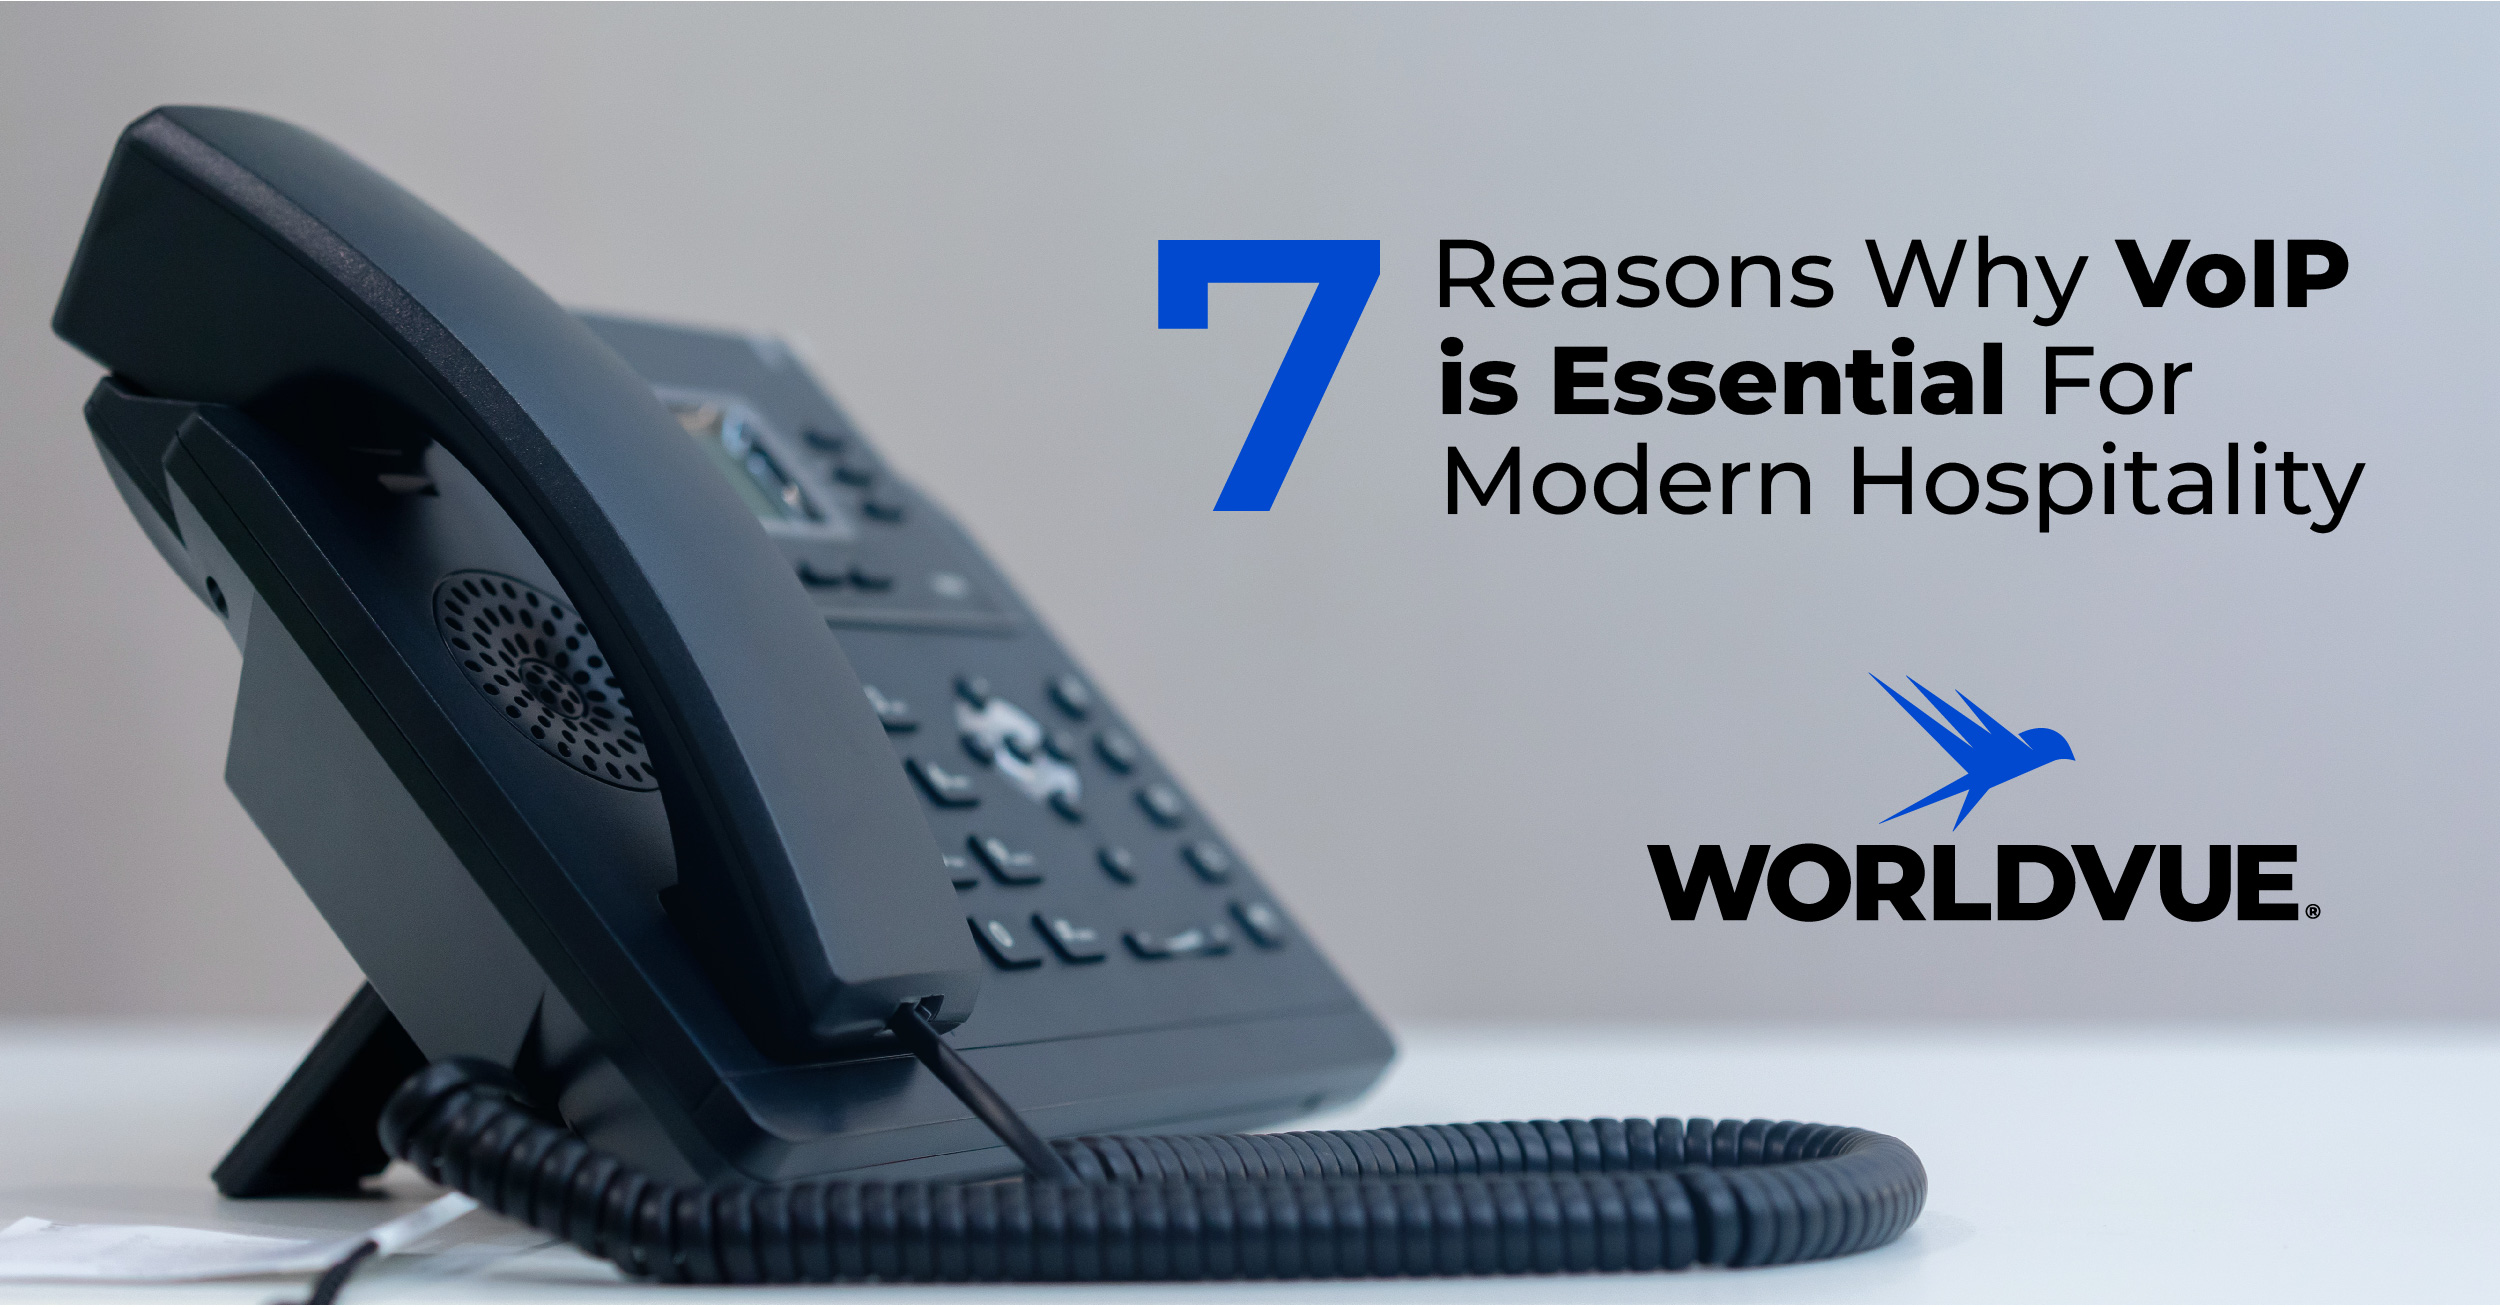 VoIP phone with text saying "7 Reasons Why VoIP Is Essential for Modern Hospitality" and WorldVue logo